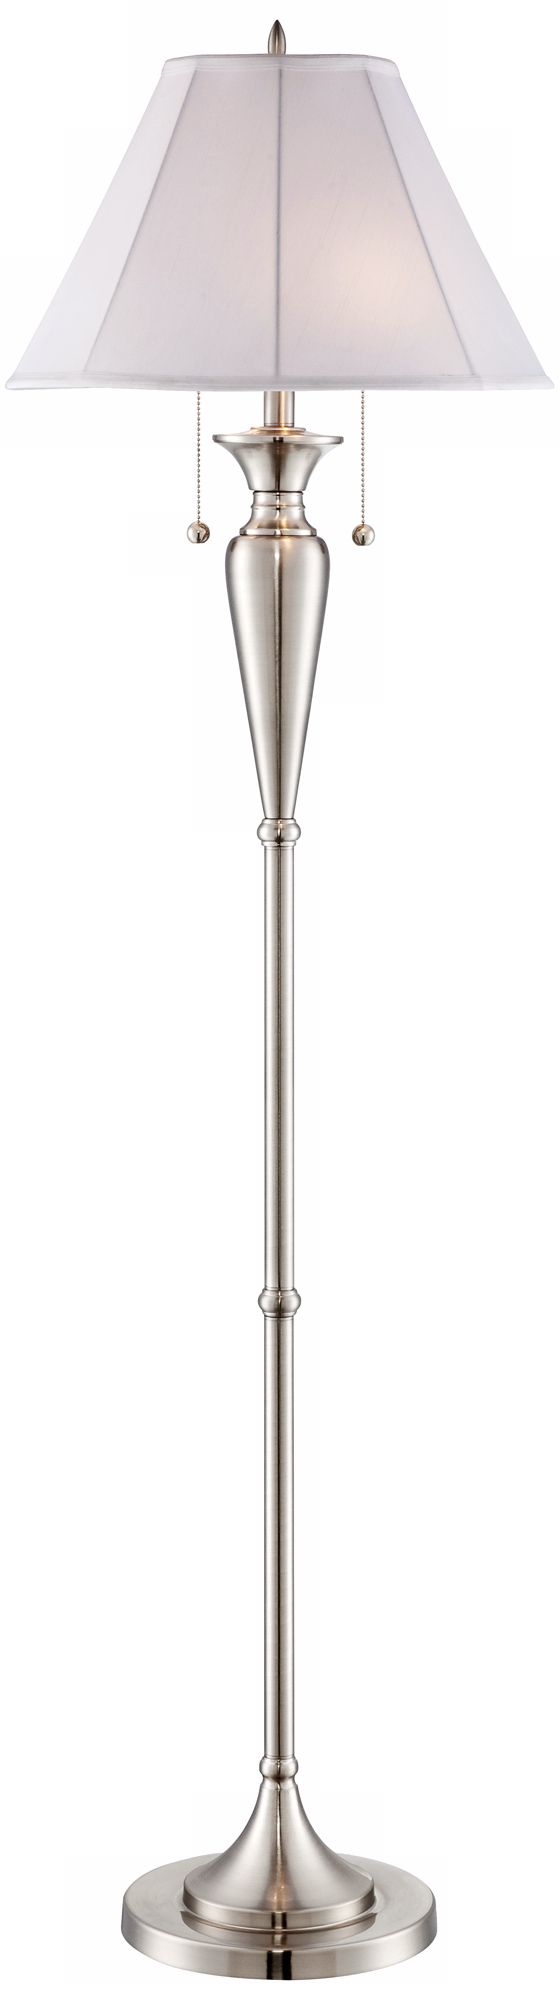 Lucent Brushed Steel Floor Lamp - Image 0